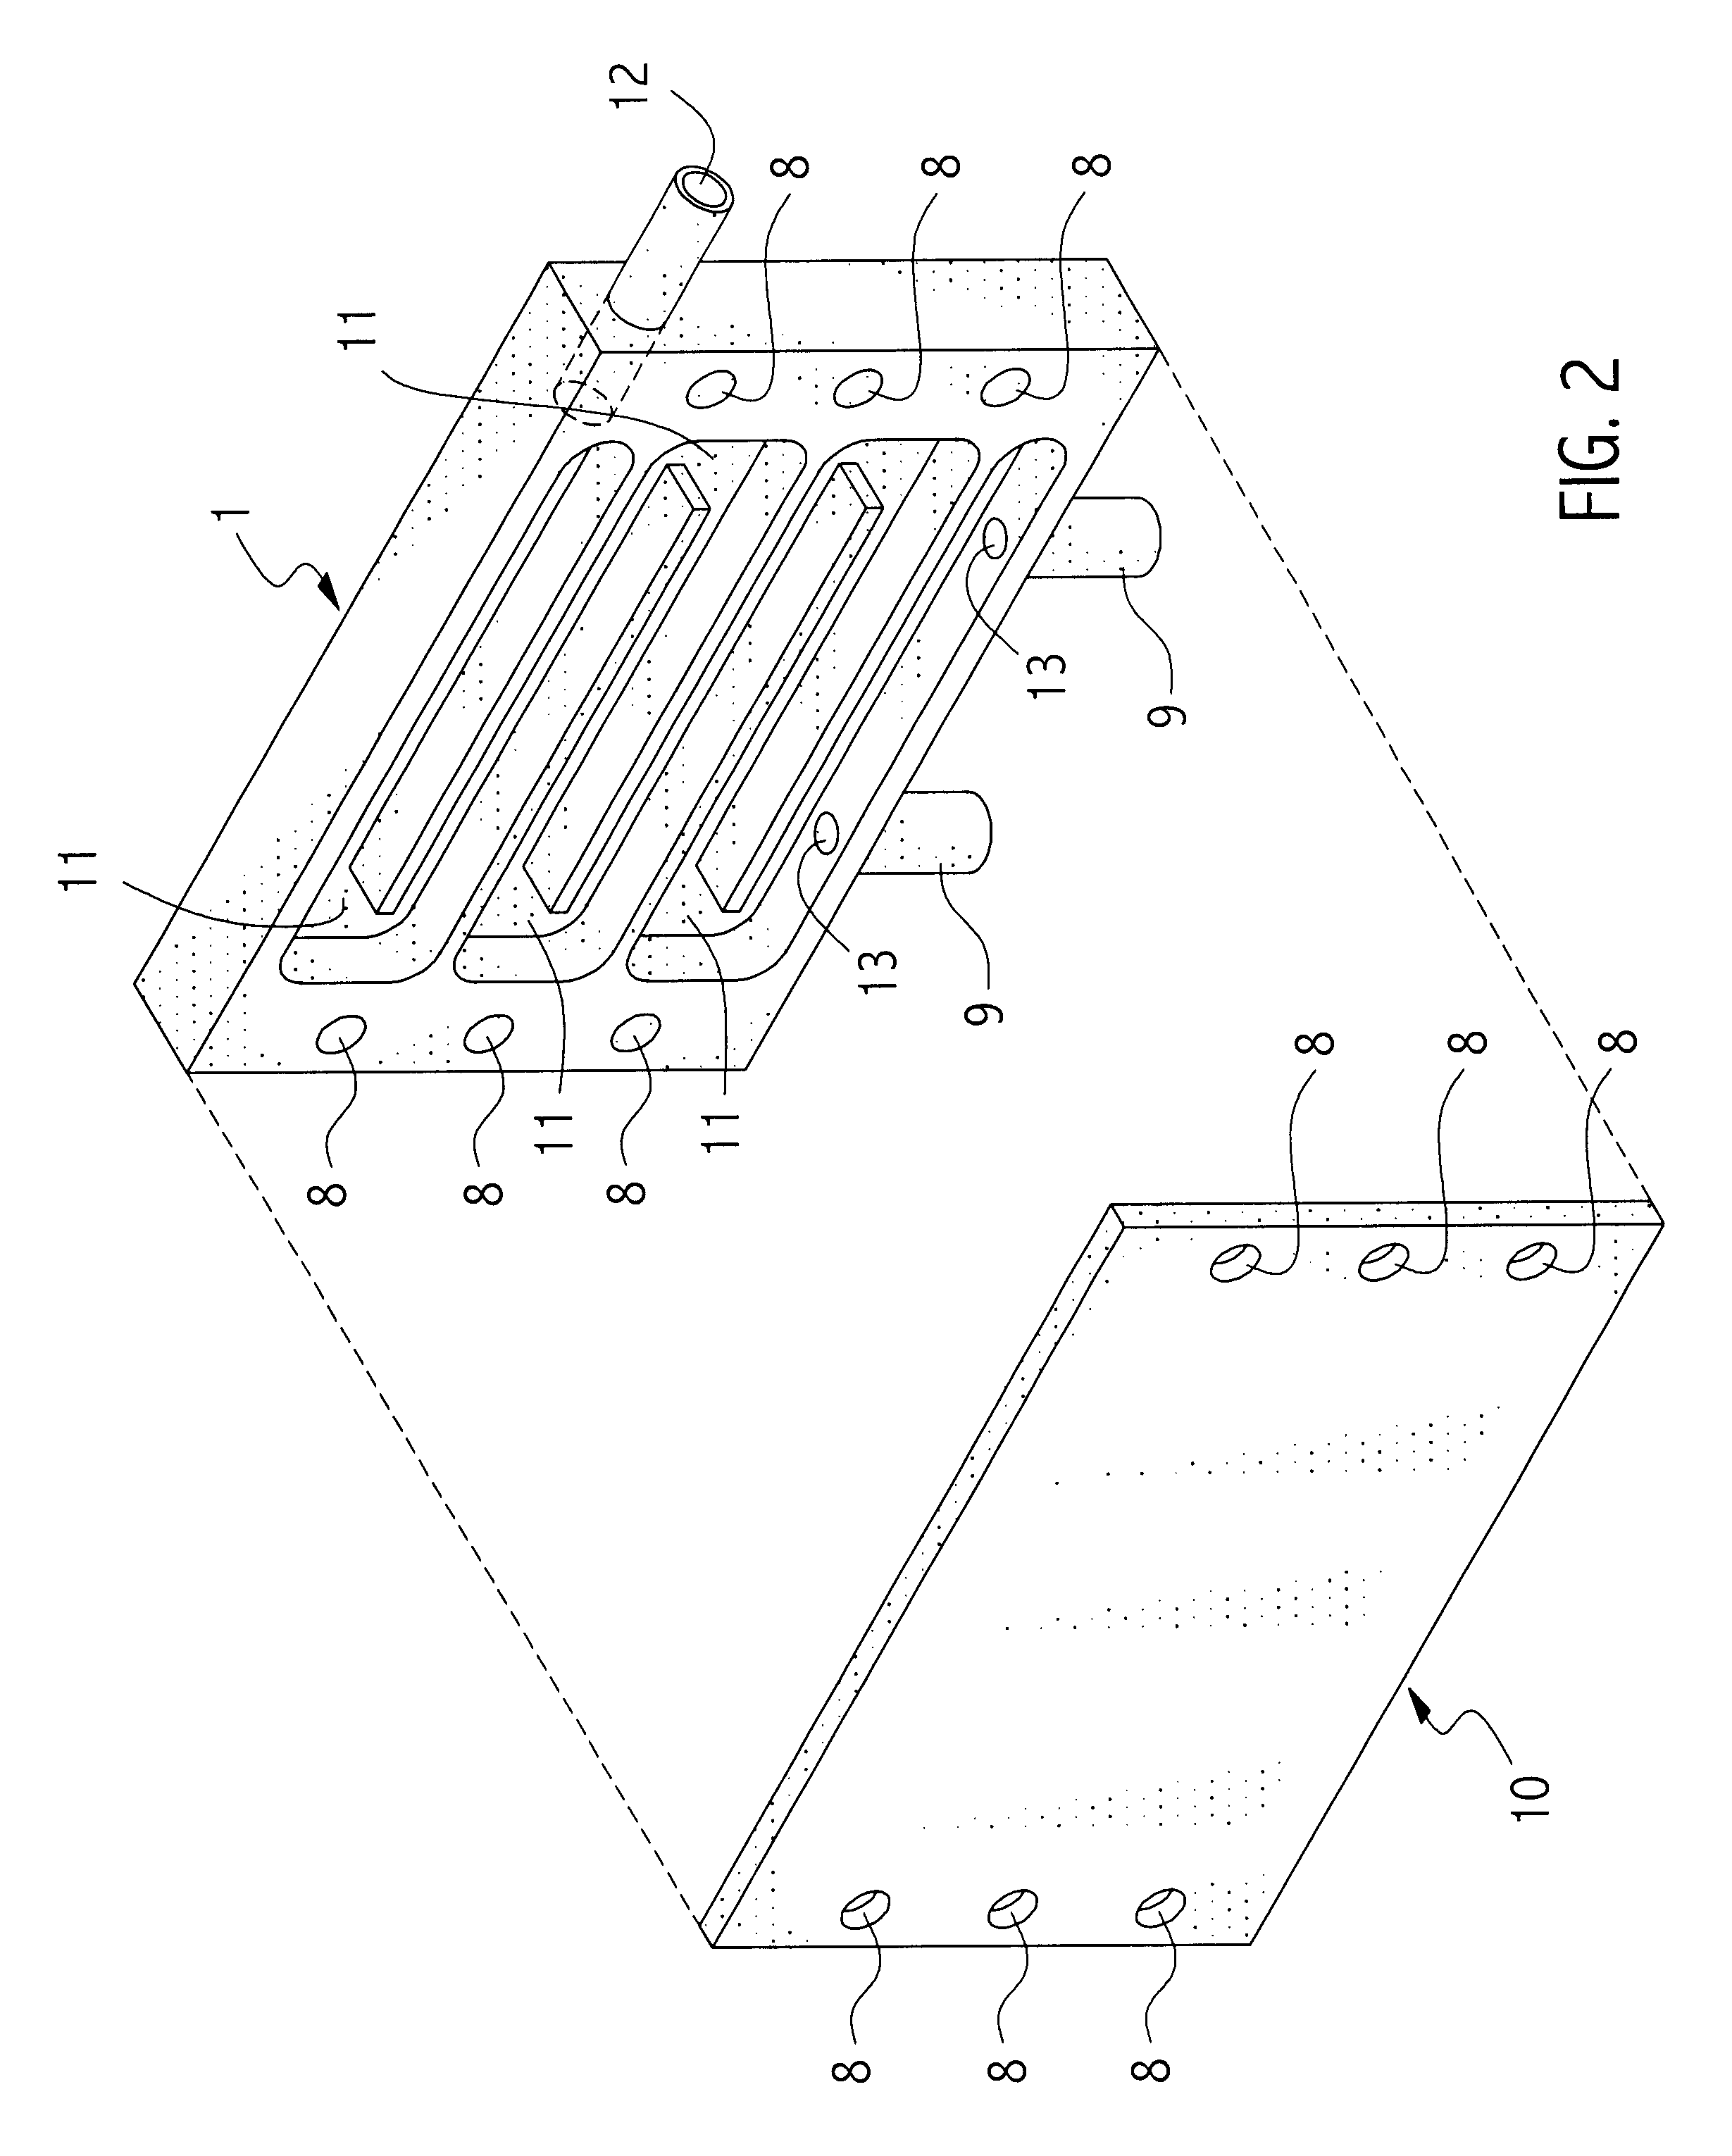 Apparatus for cooling fuel and fuel delivery components